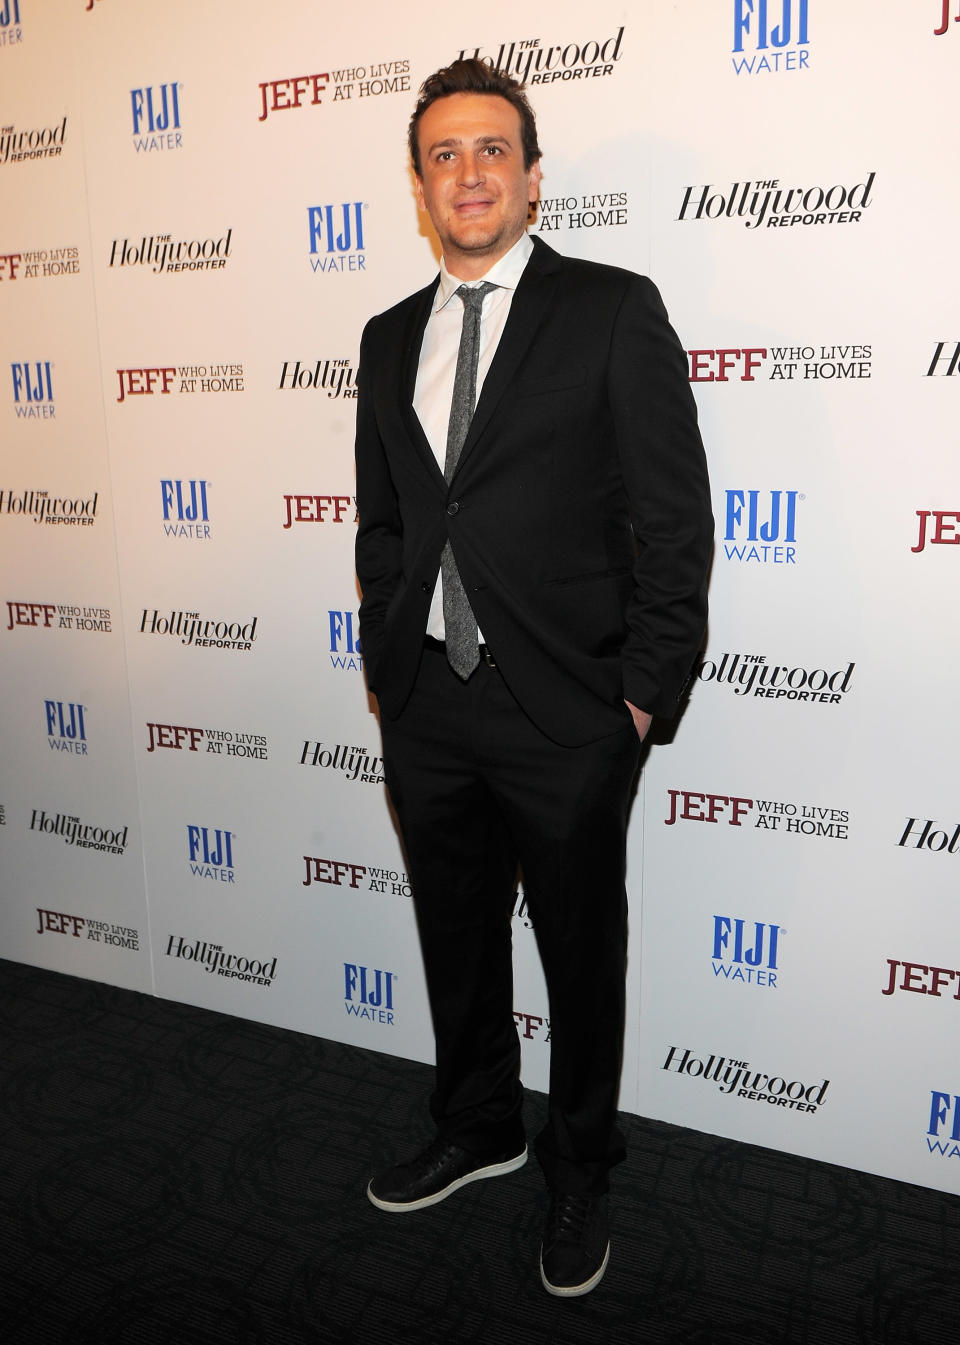 The Hollywood Reporter And FIJI Water Host A Screening Of